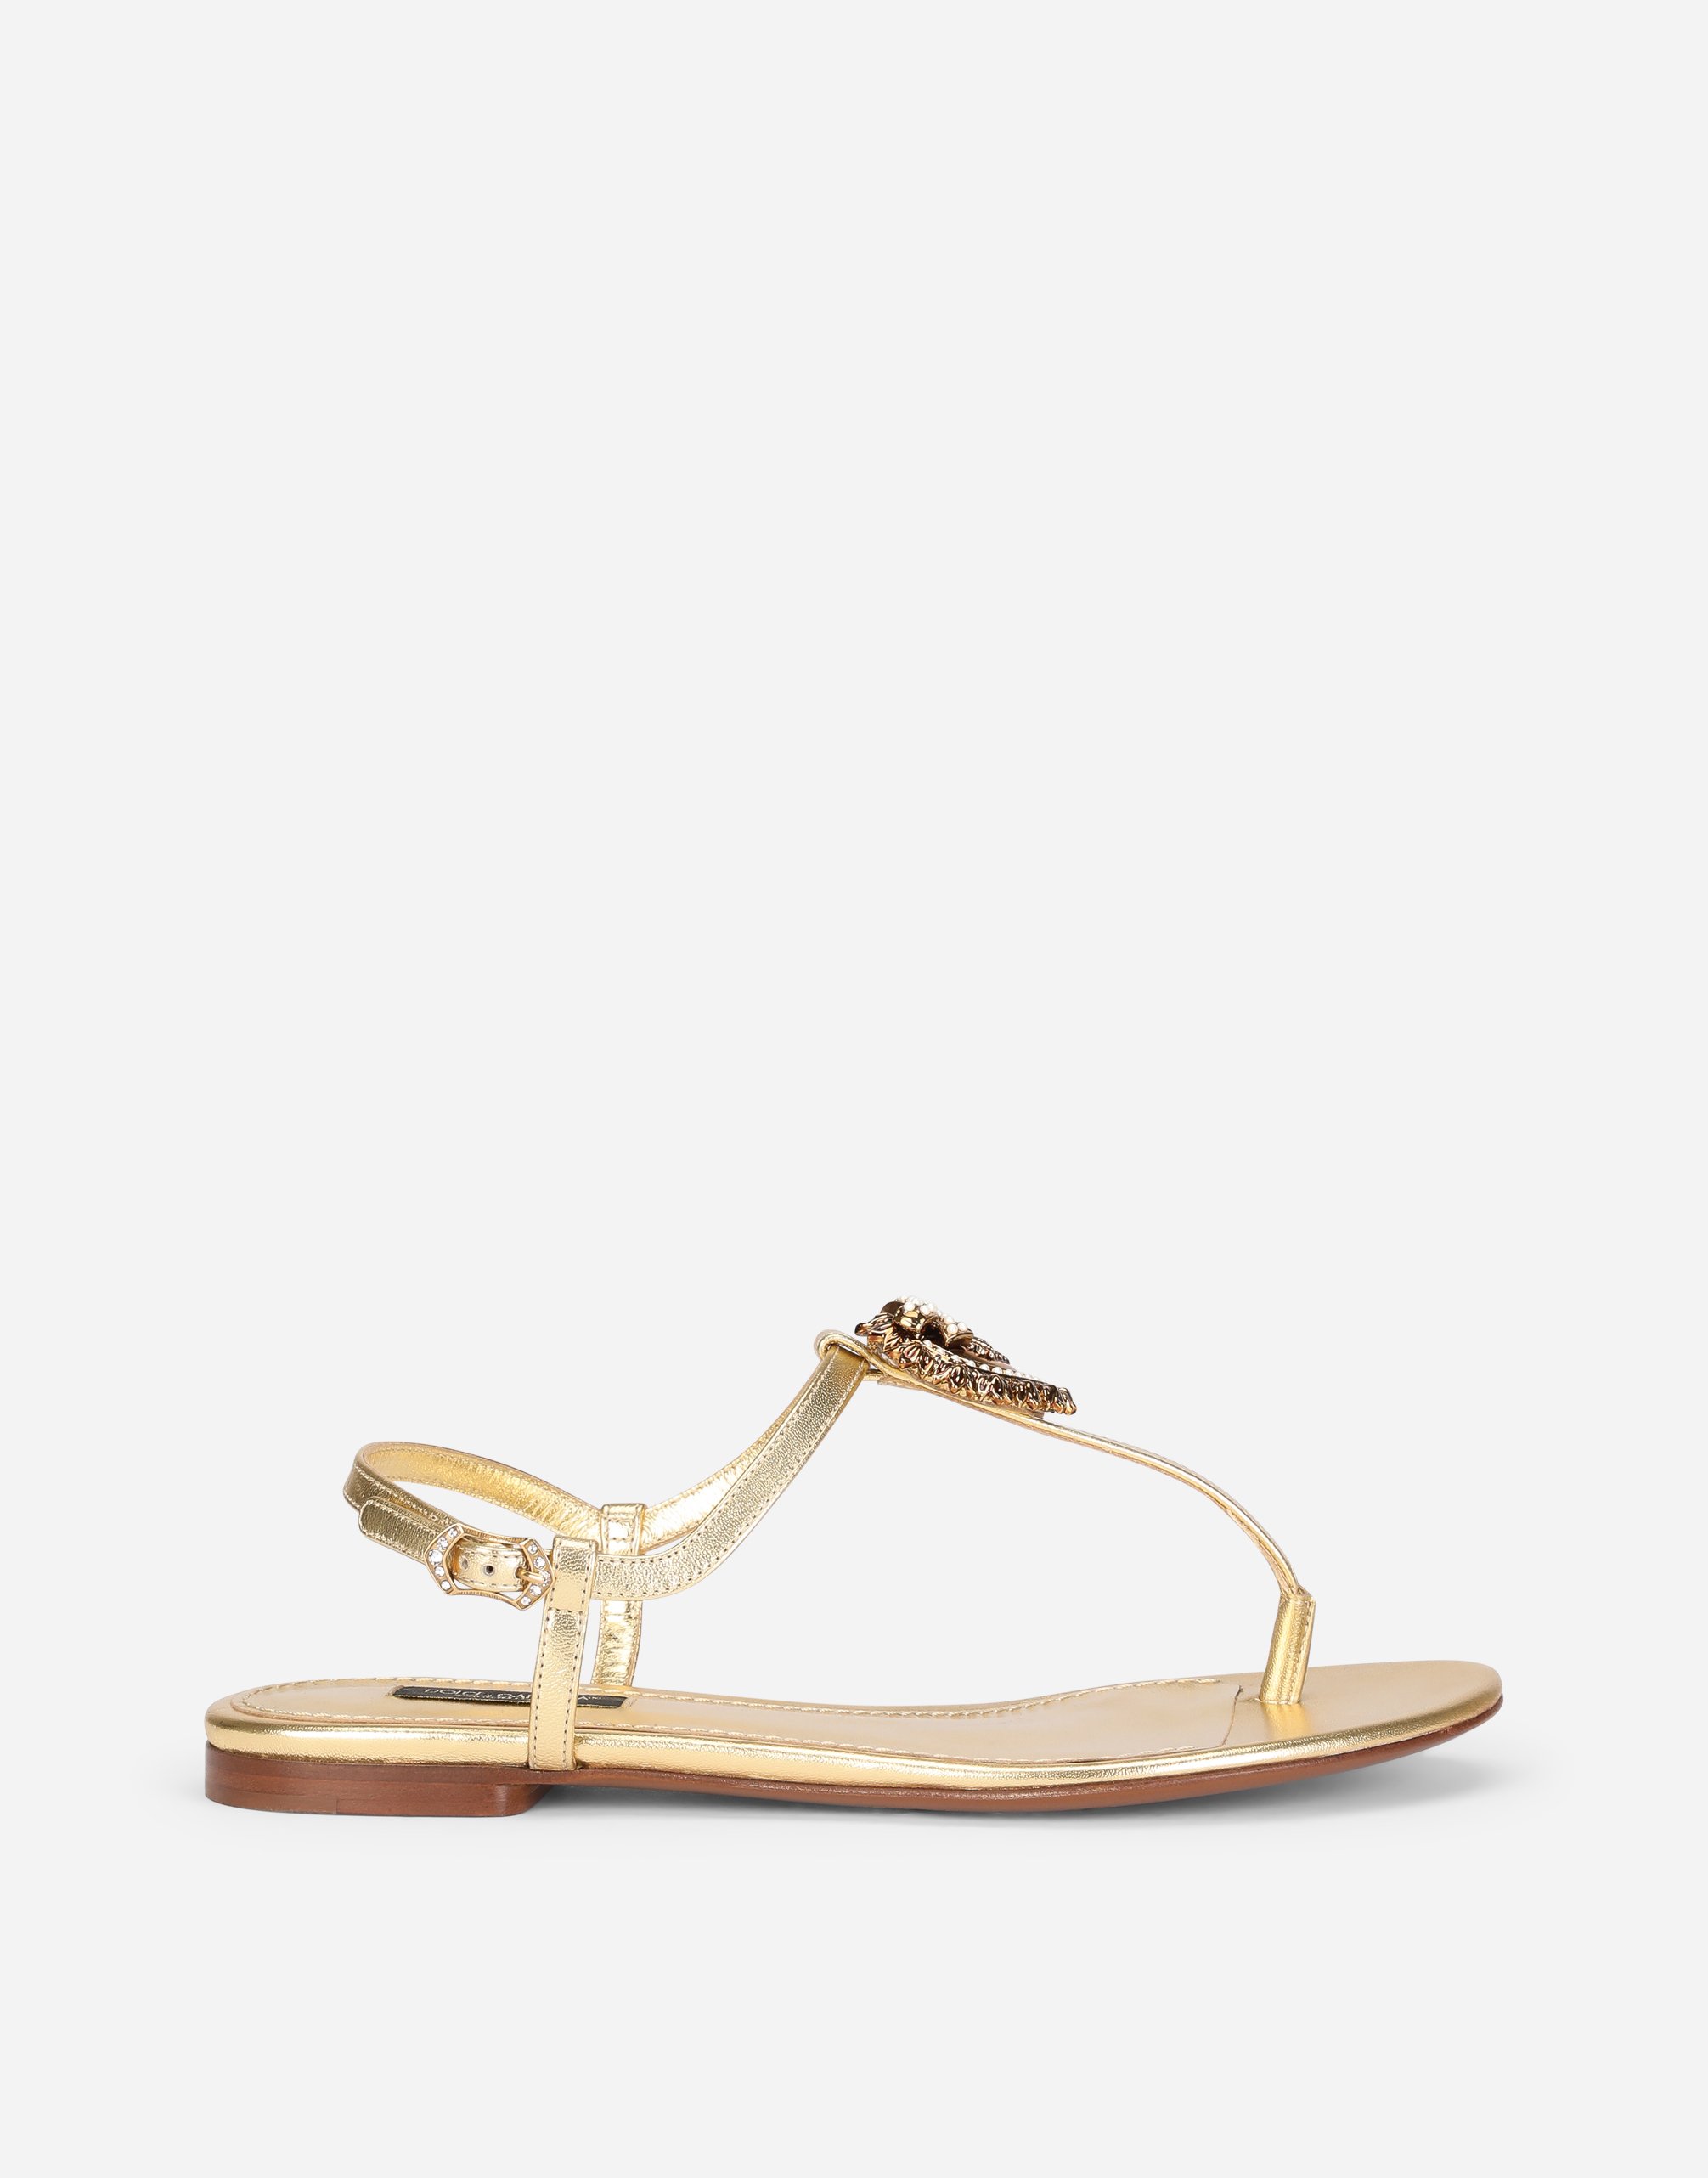 Devotion thong sandals in nappa mordore in Gold